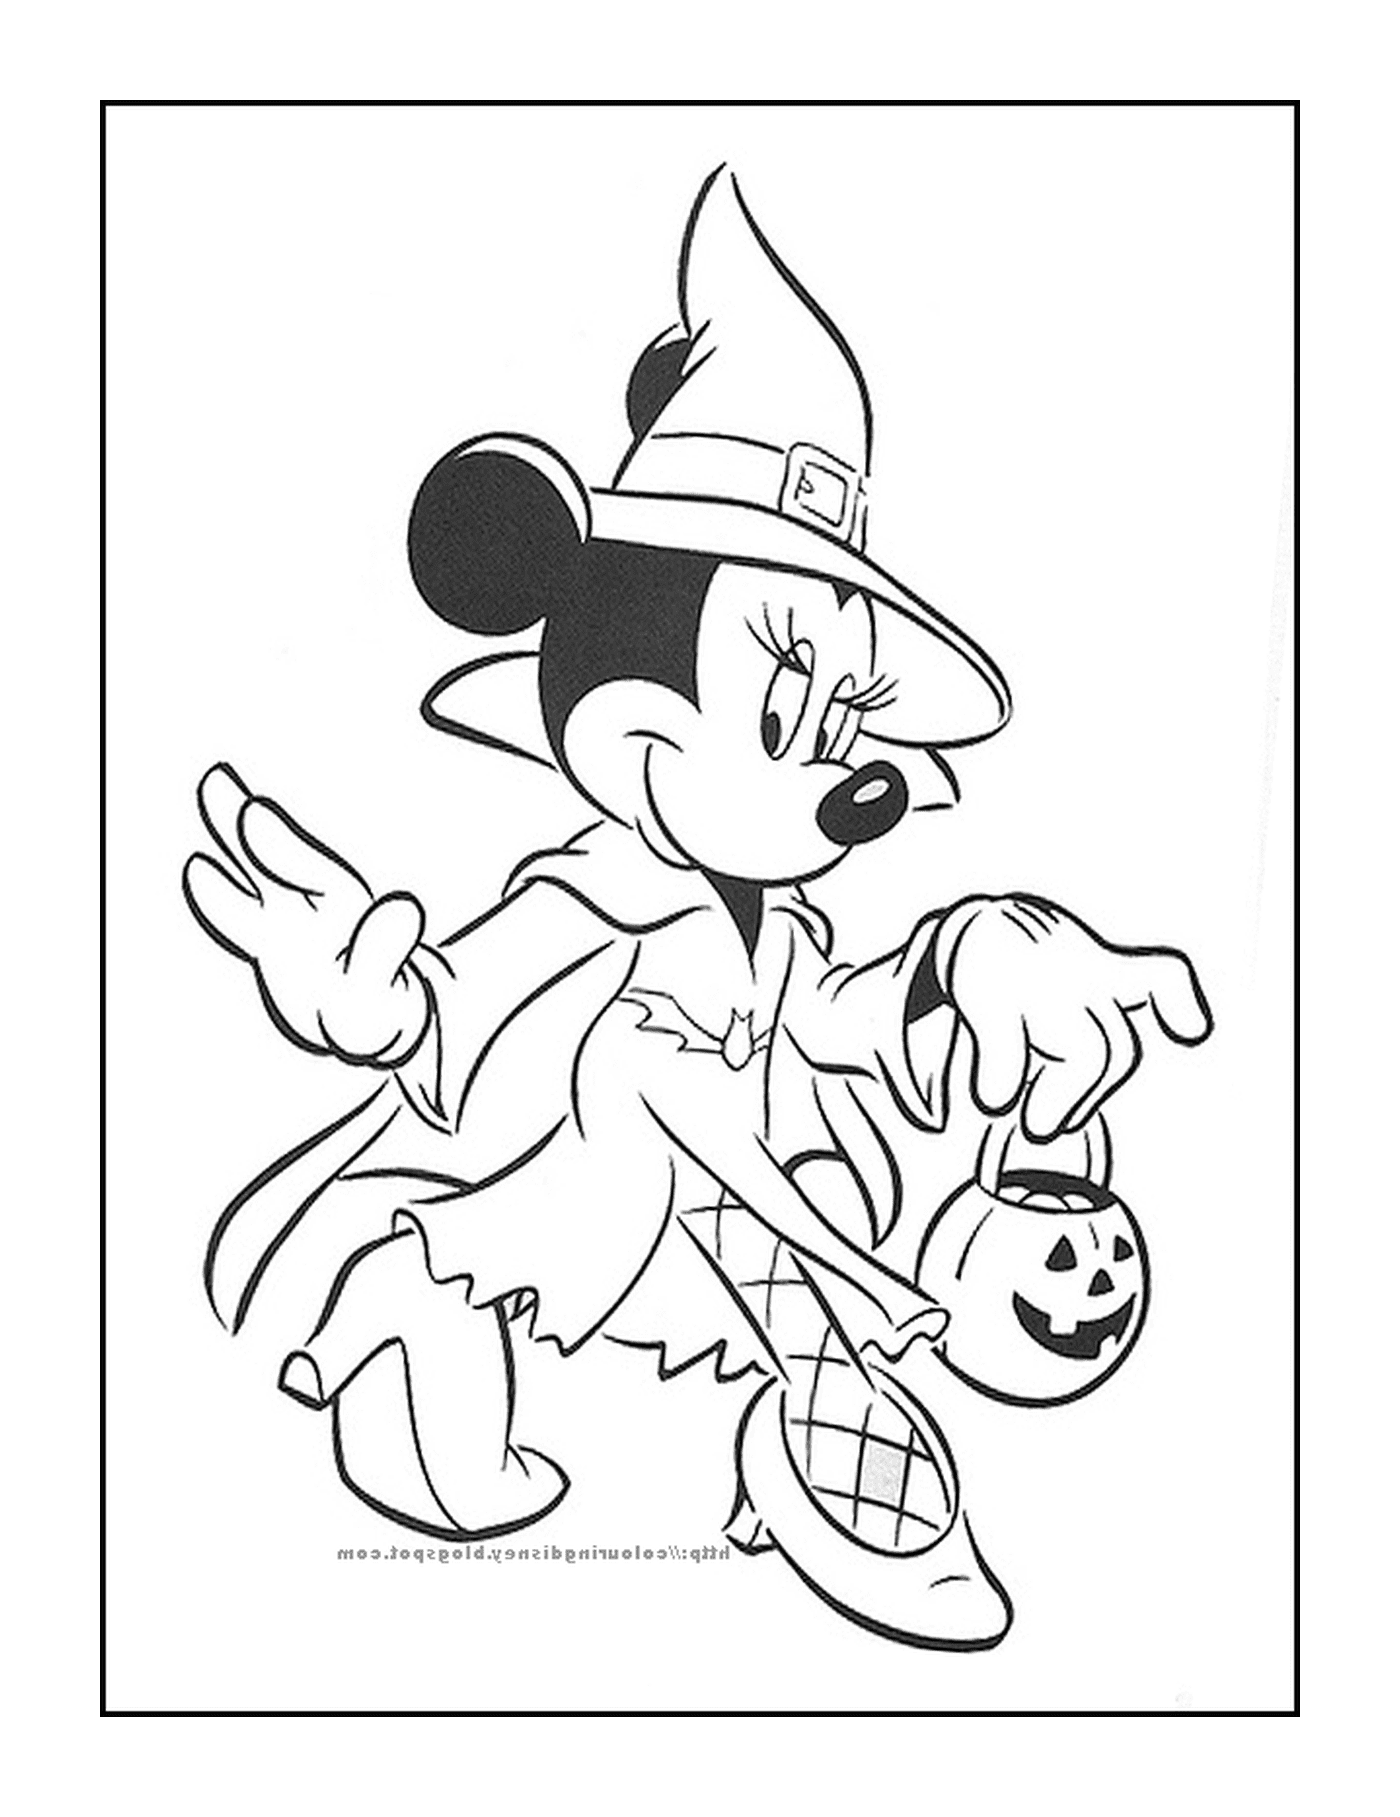  Minnie Mouse disguised as a witch for Halloween 